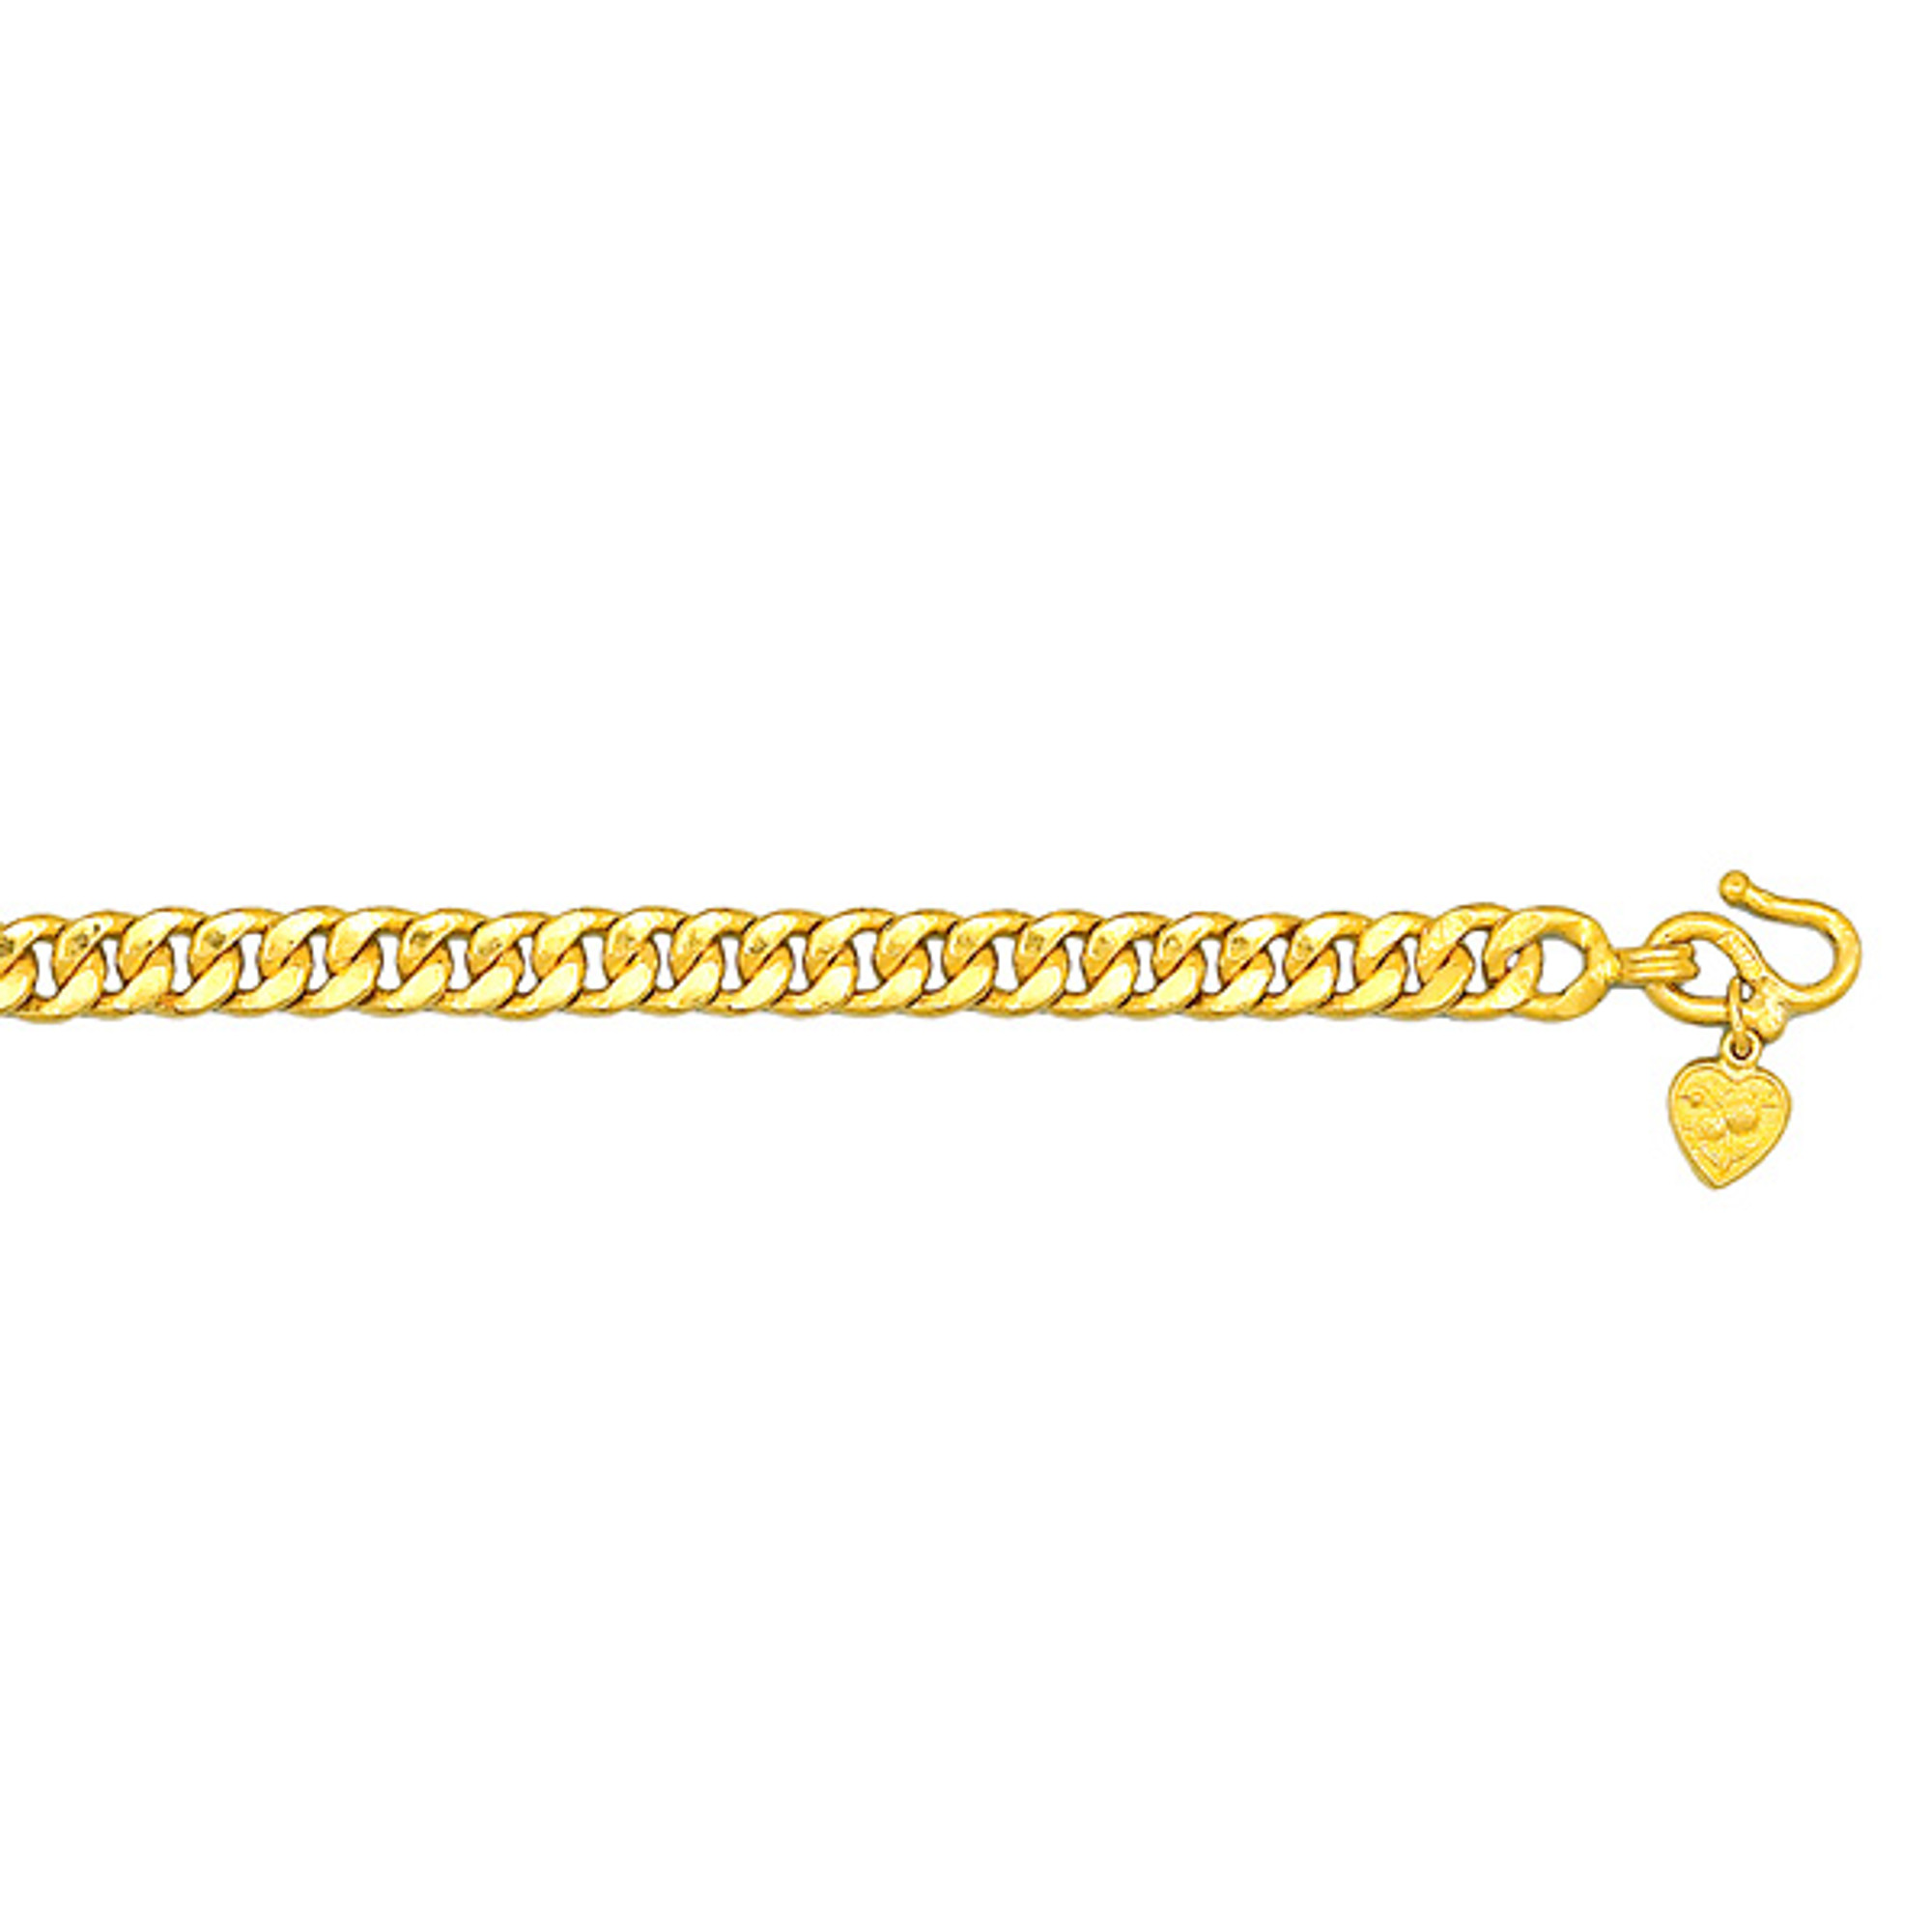 Pure Solid 999 24K Yellow Gold Chain Men Women Curb Link Necklace